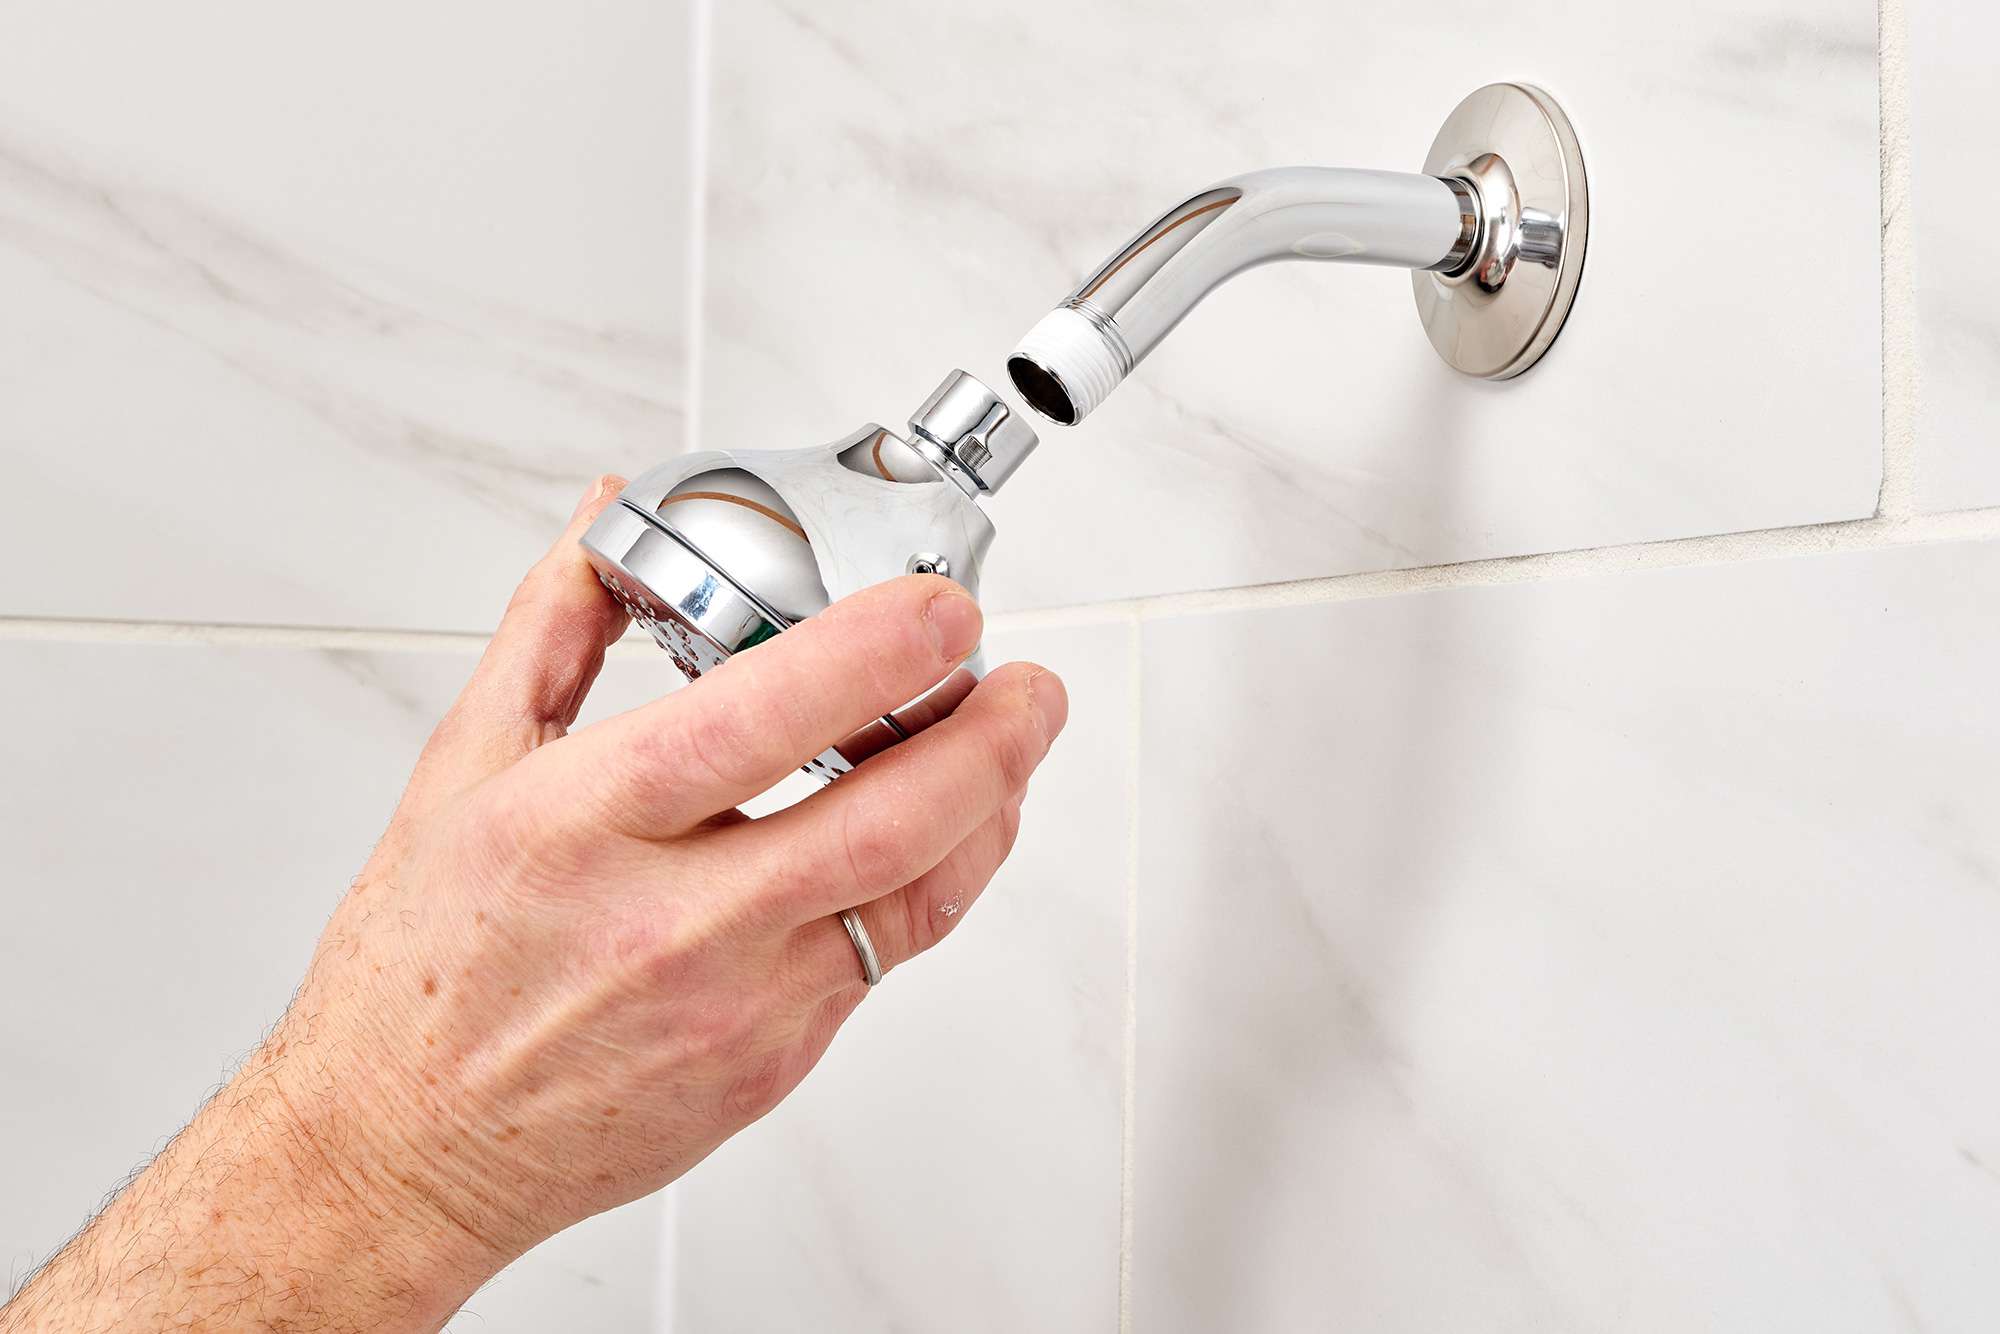 Applying Plumbers Tape to replace a showerhead 